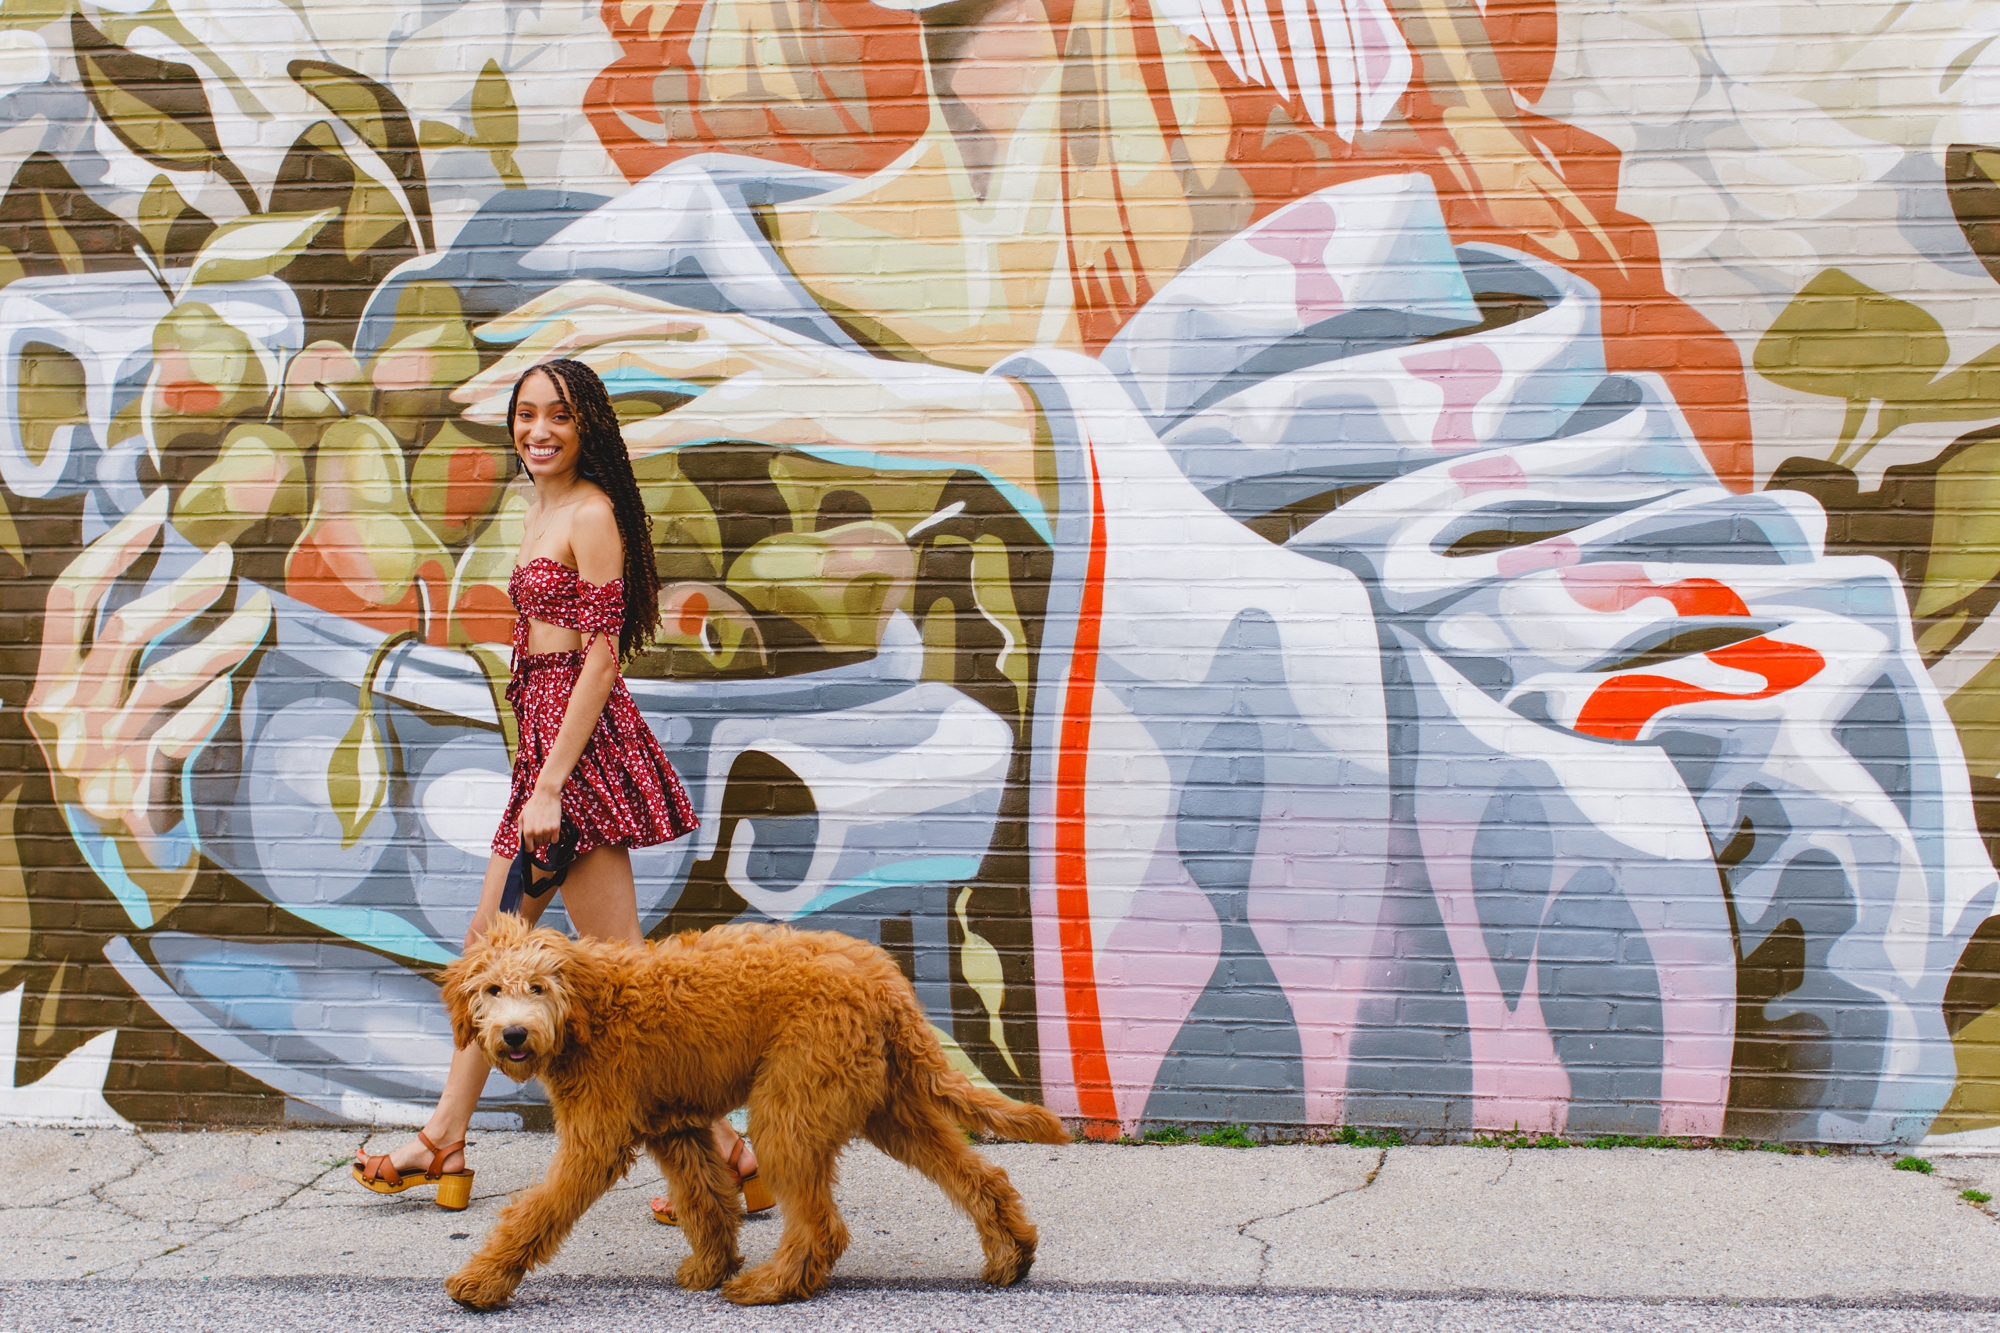 Alize and her dog Frank walk in front of a mural